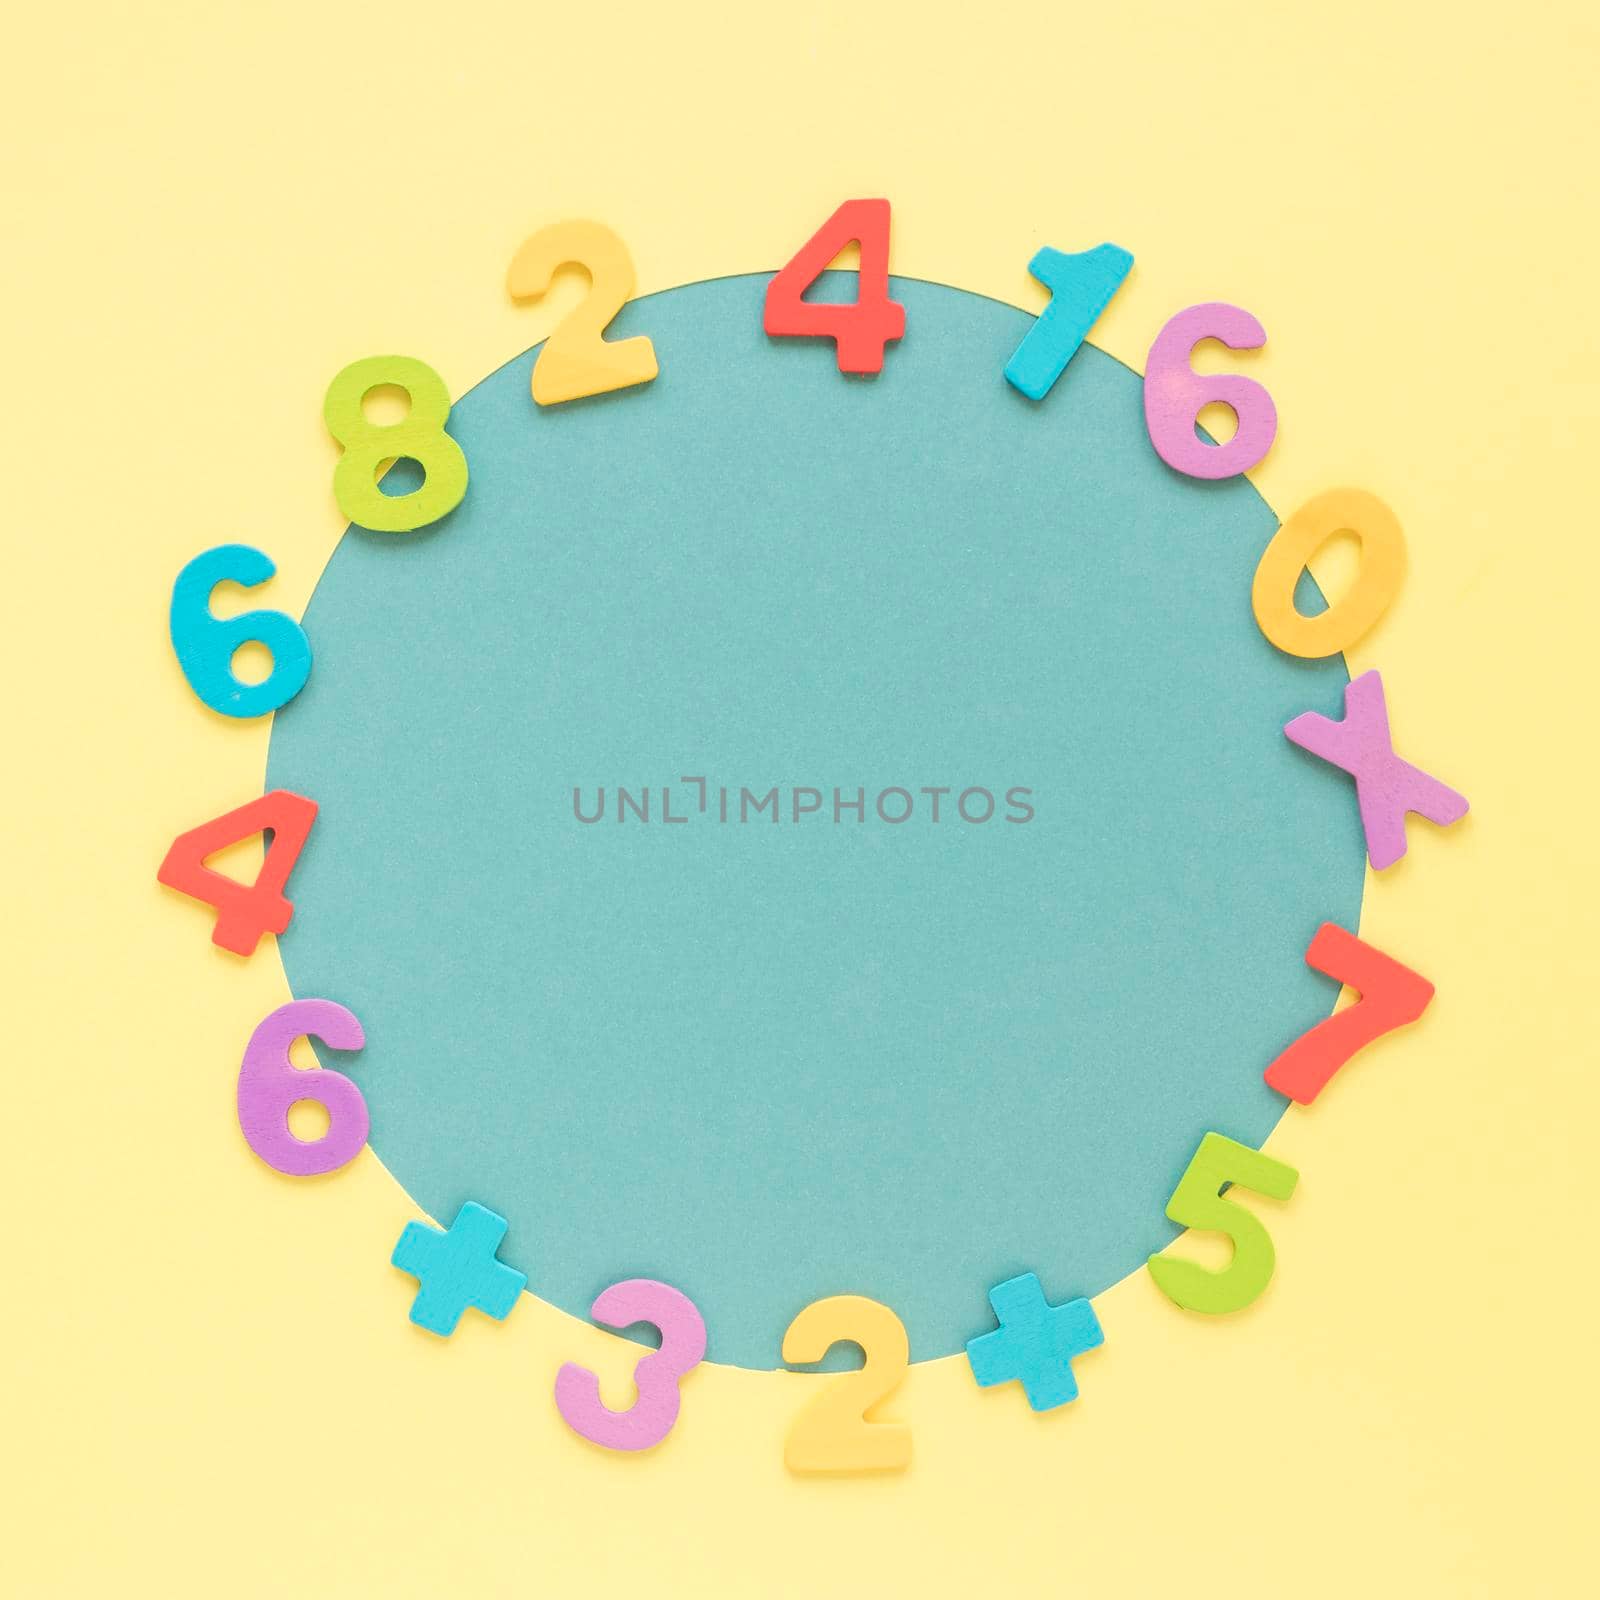 colourful math numbers frame surrounding blue circular shape by Zahard